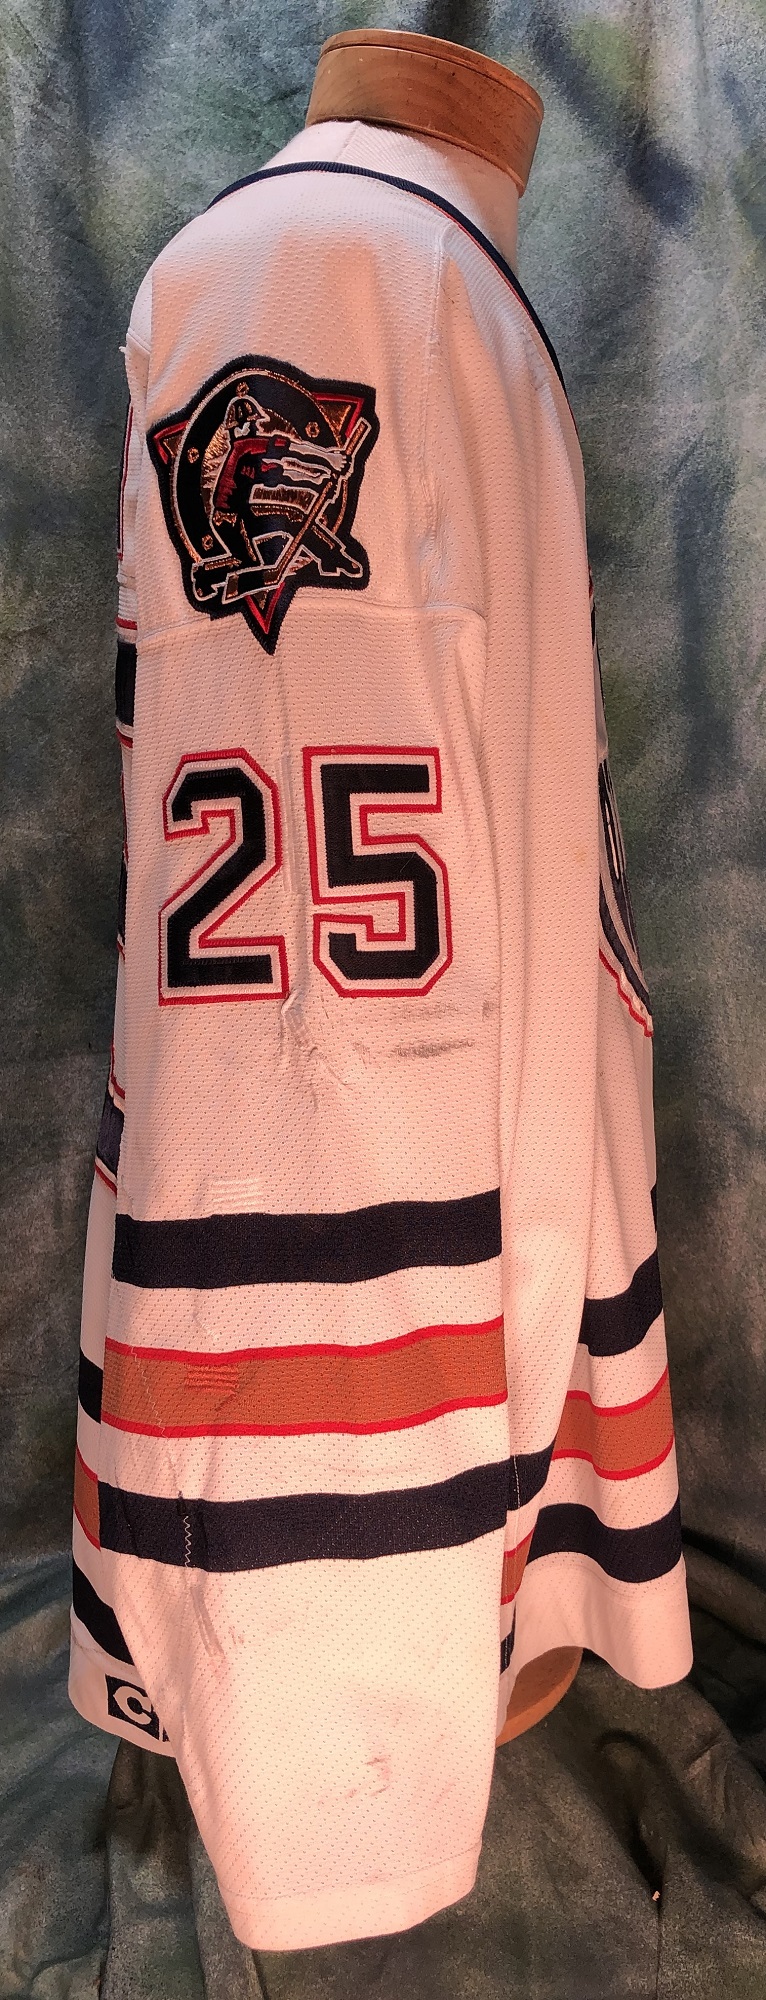 Frosty's Hockey World - Jersey Collection